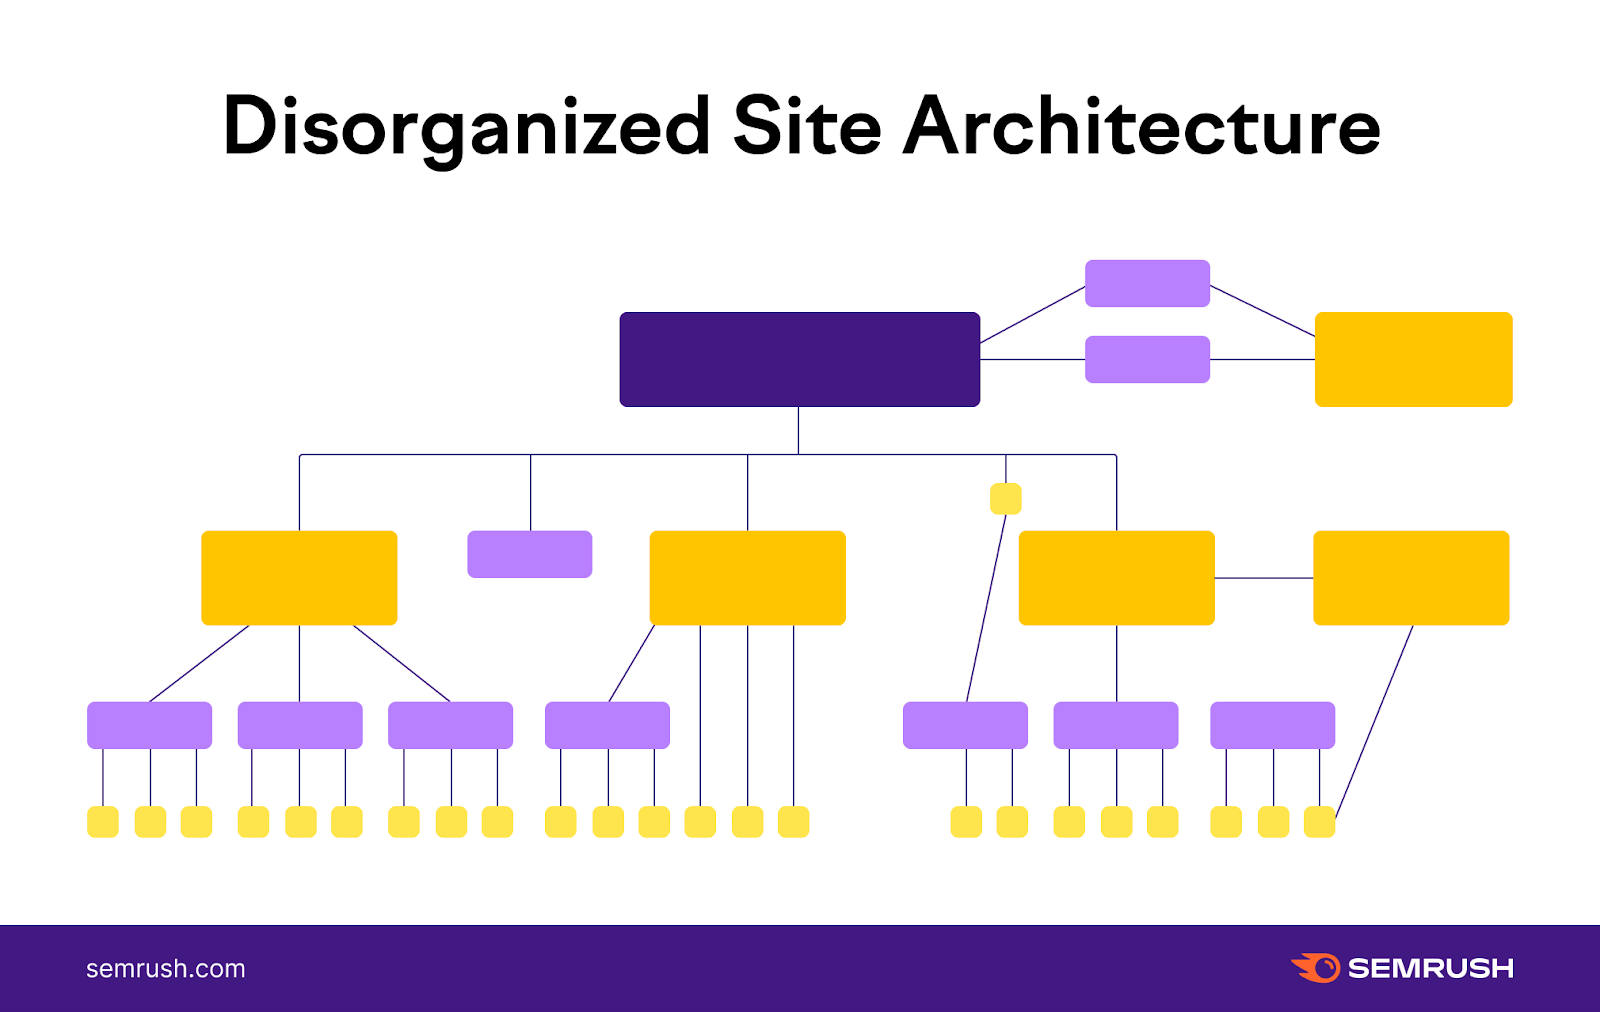 an image showing an example of disorganized site architecture